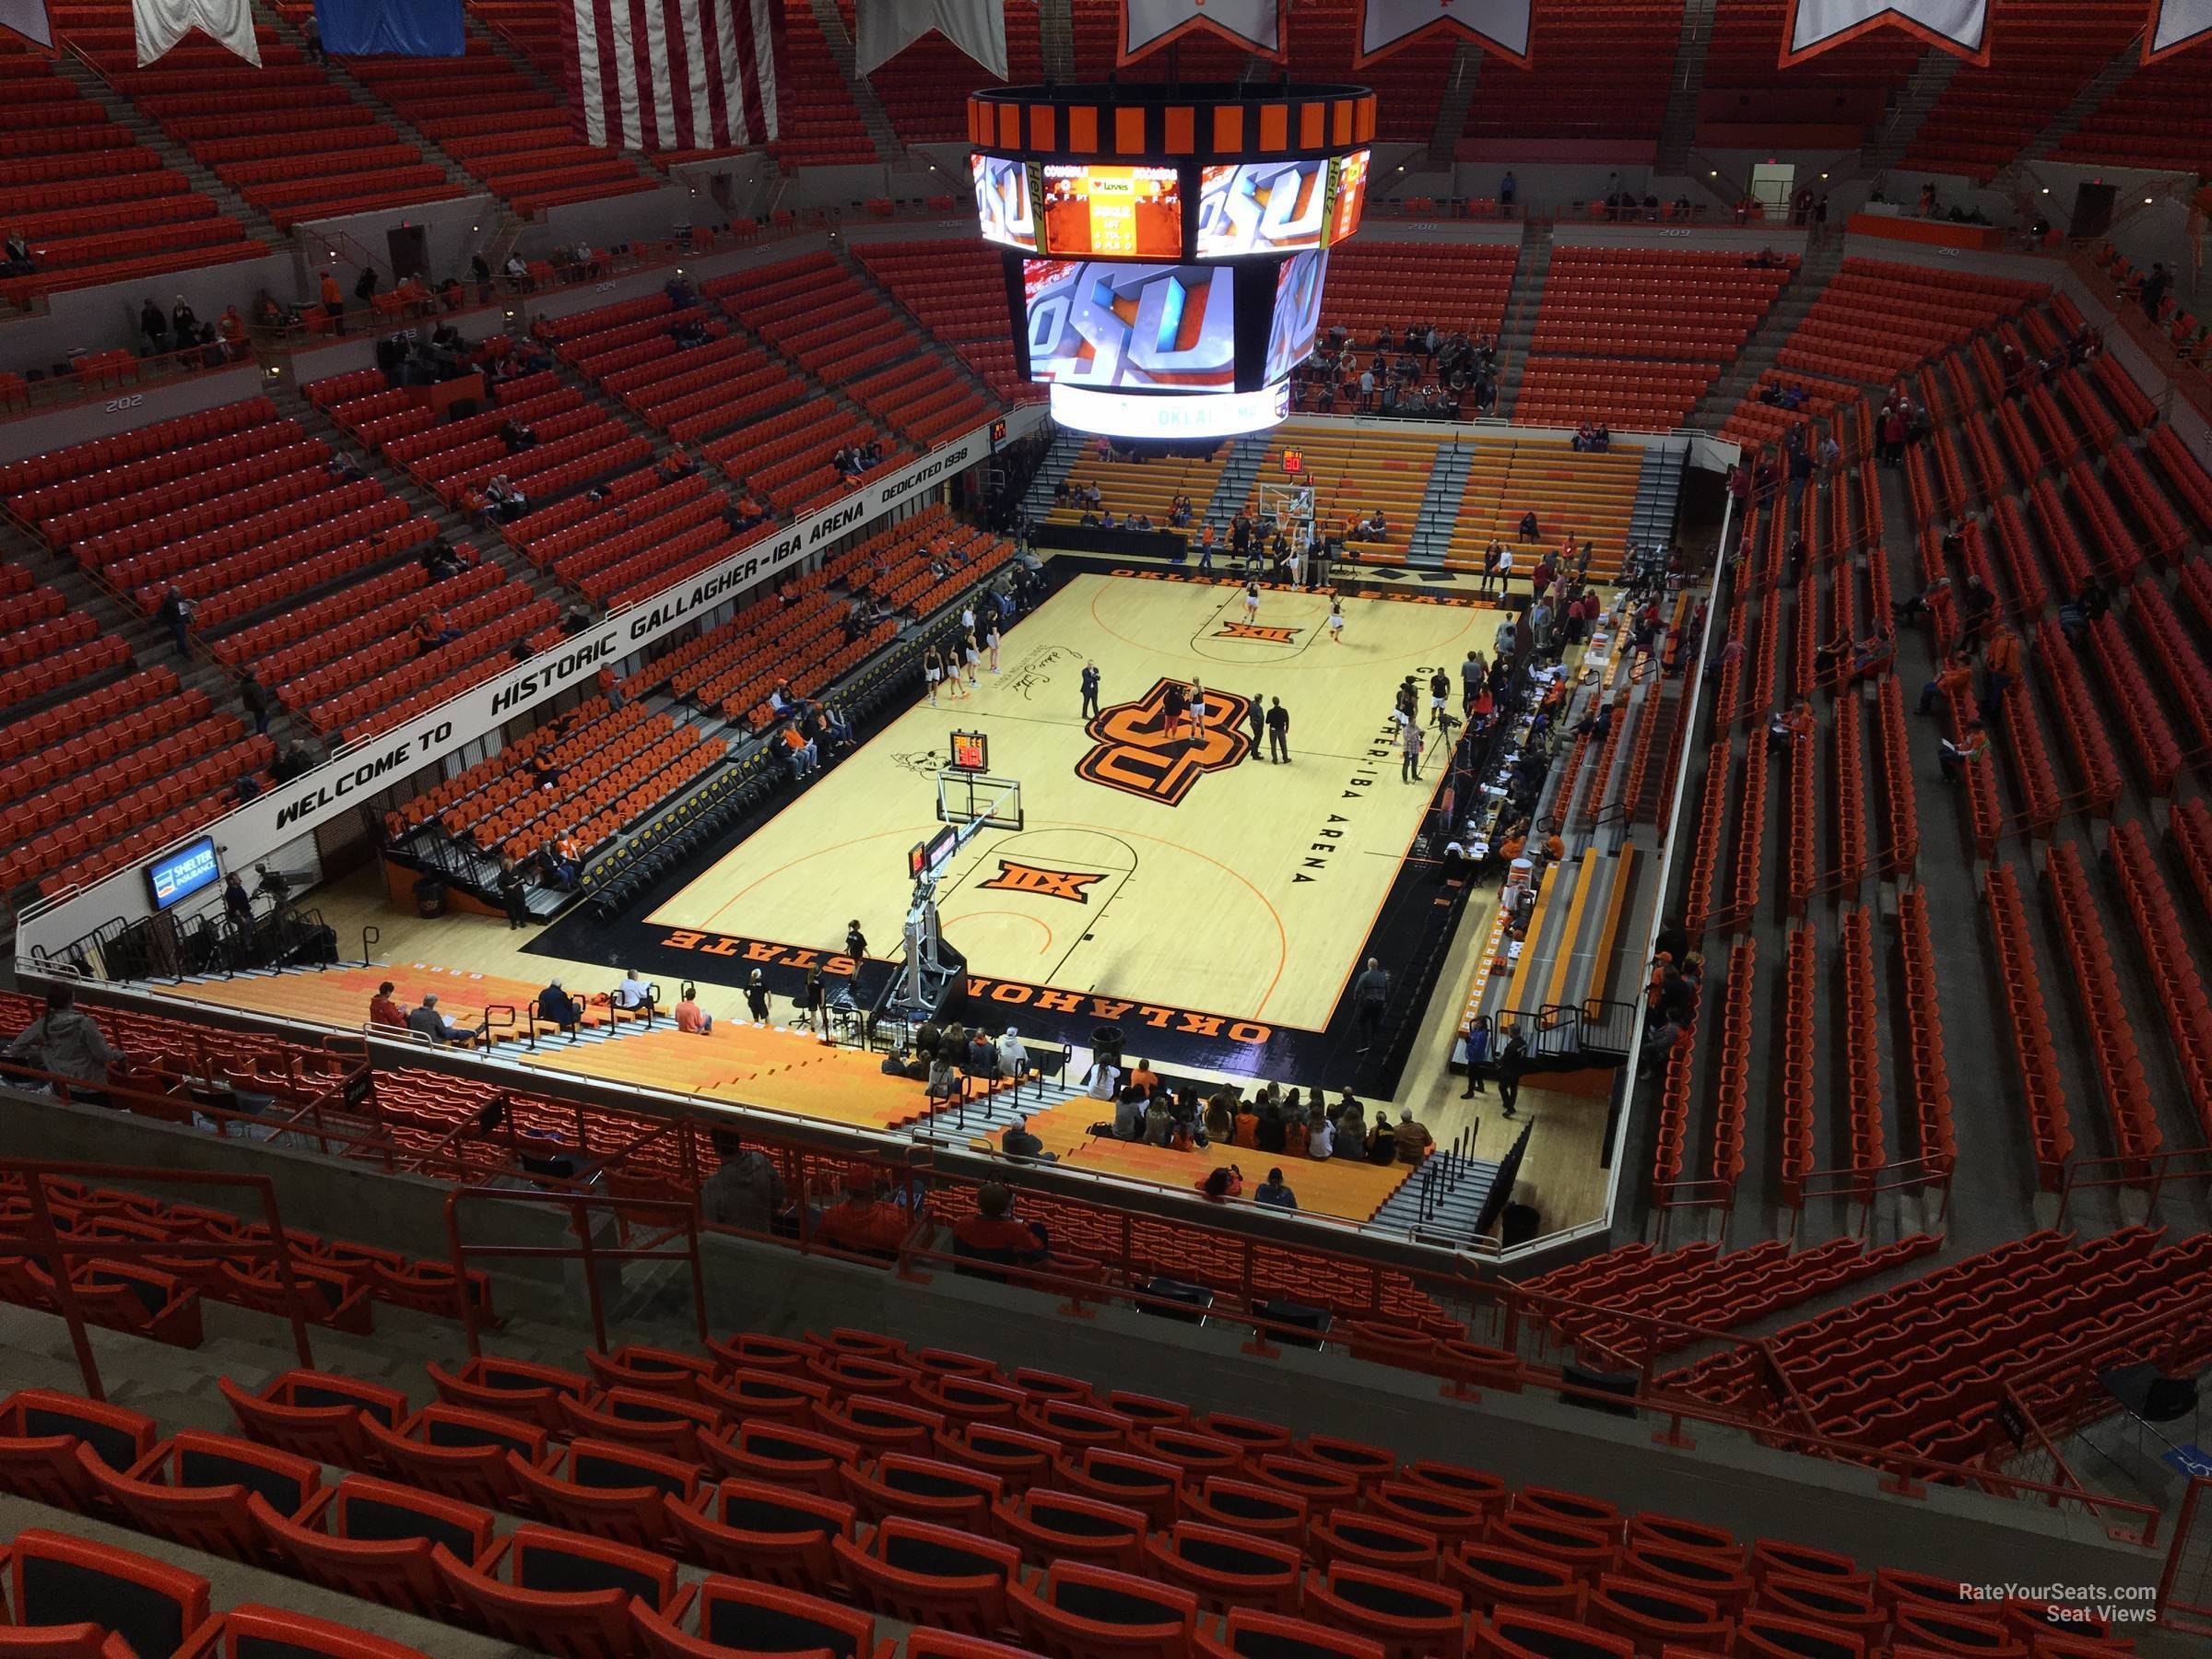 section 323, row 10 seat view  - gallagher-iba arena